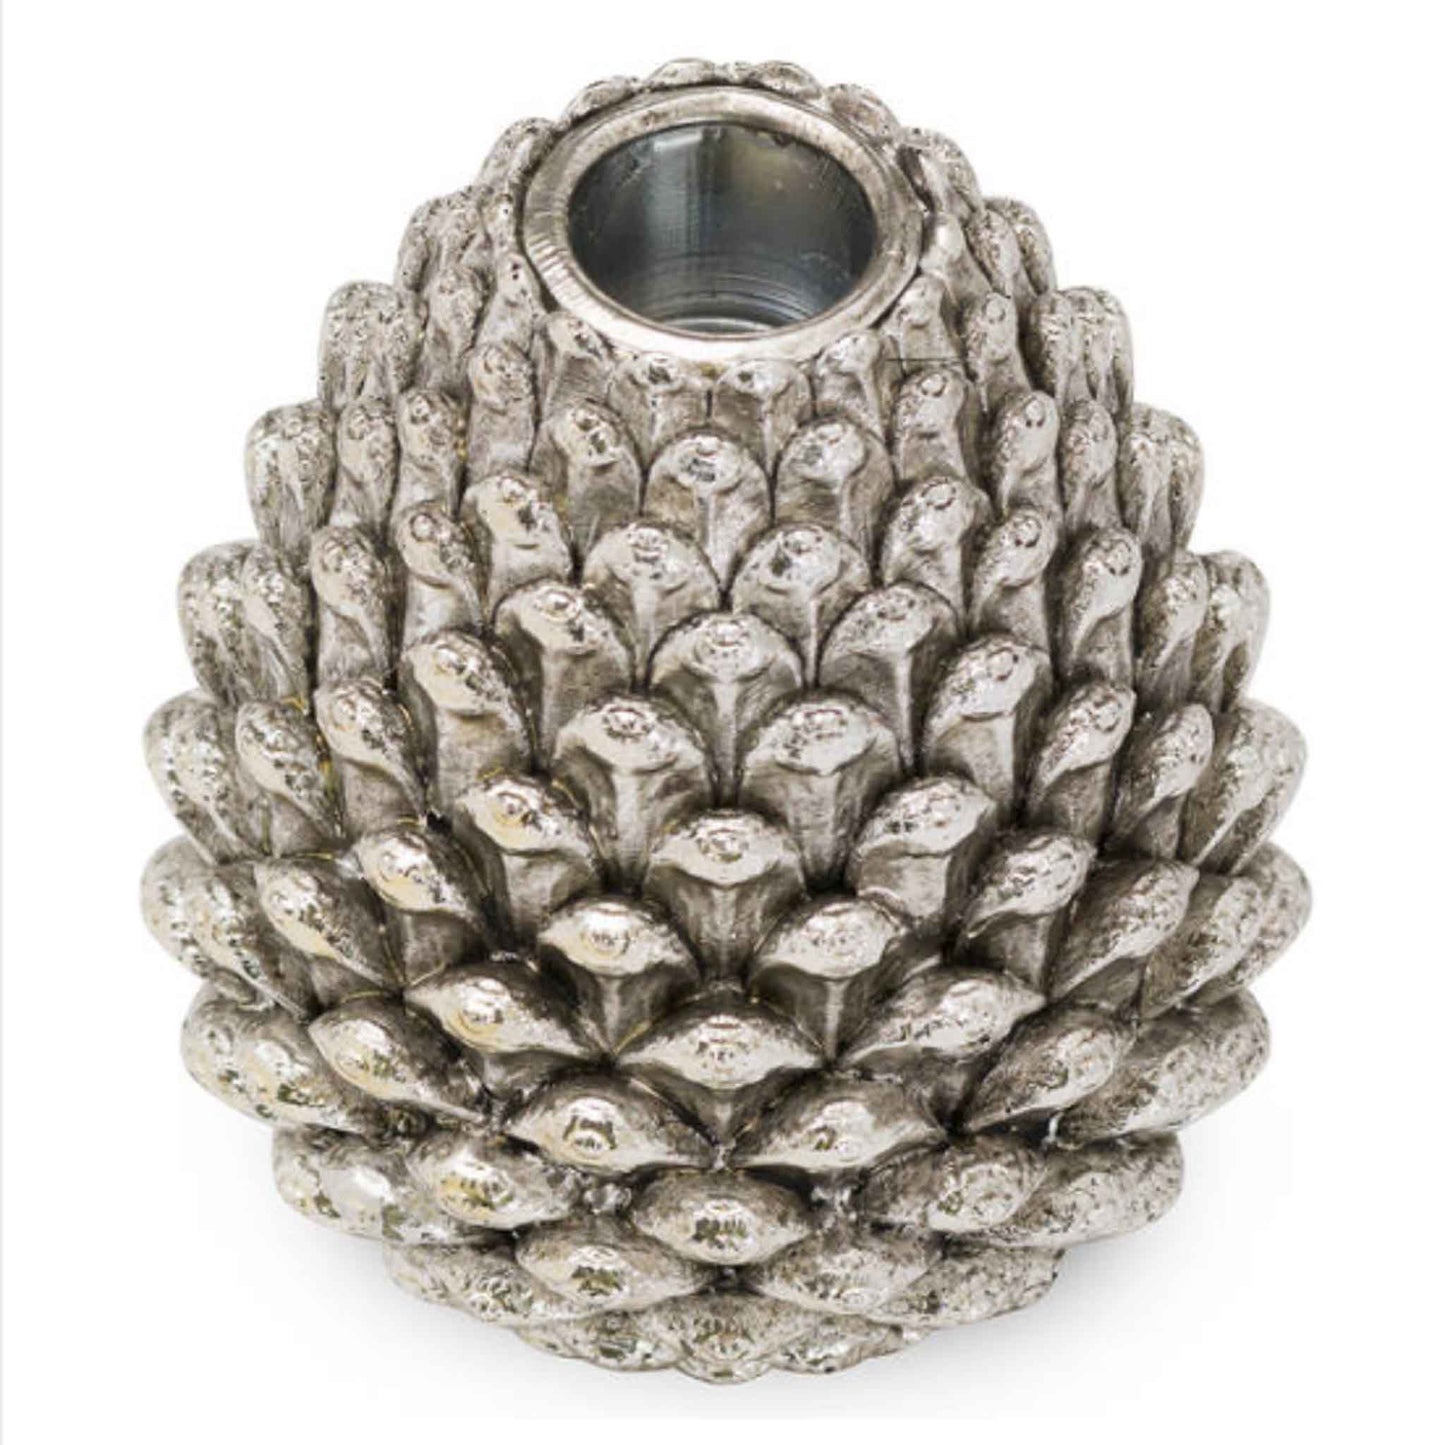 Silver Effect Pinecone Candle Holder